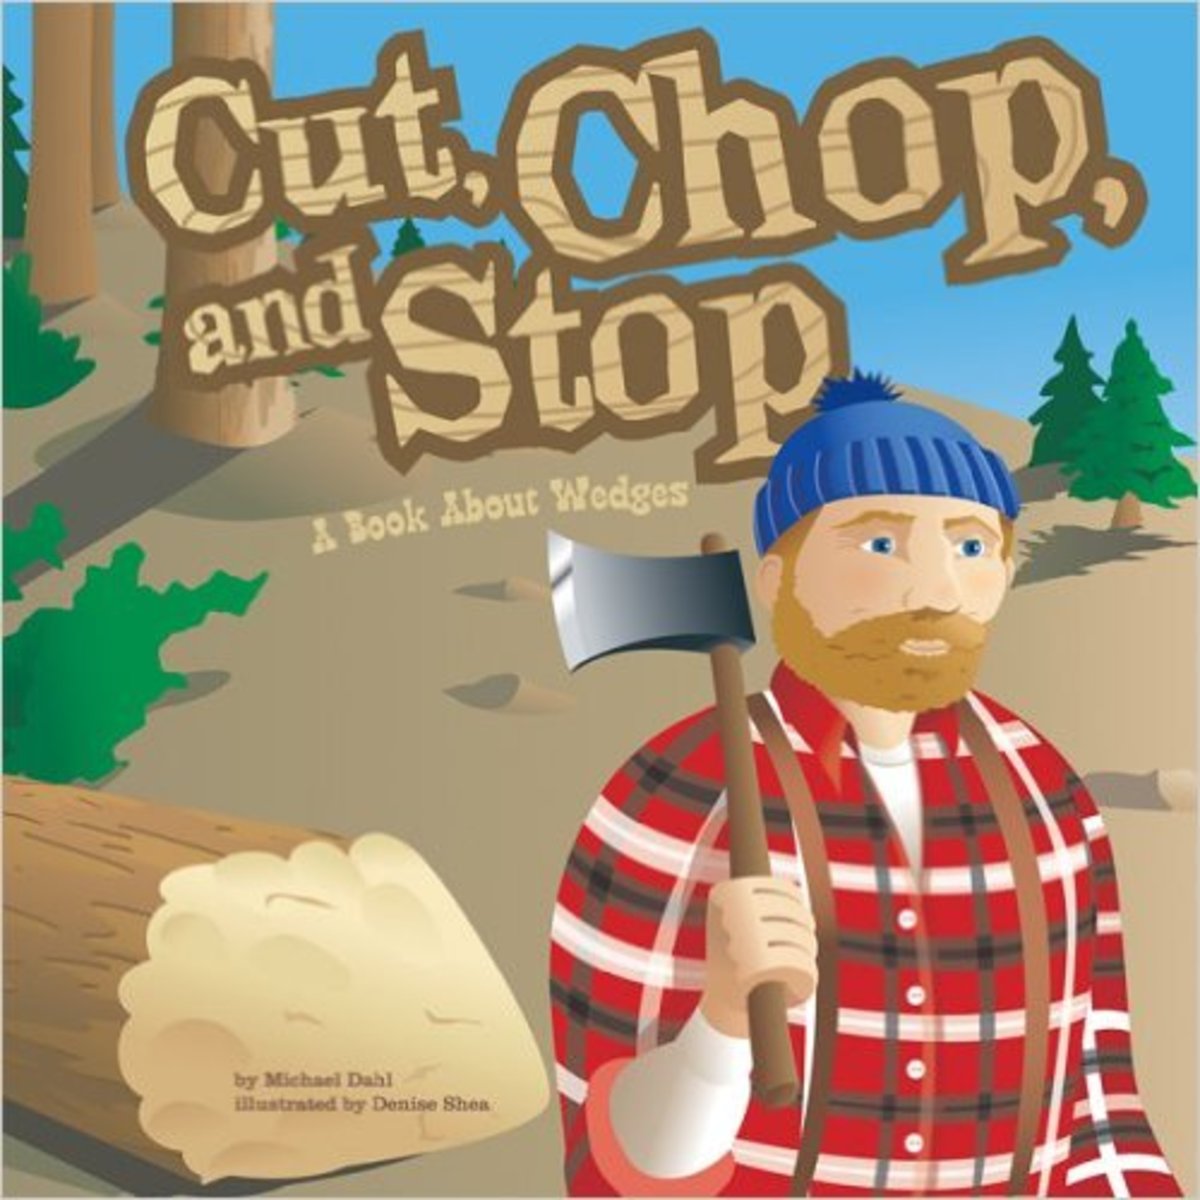 Cut Chop And Stop A Book About Wedges Amazing Science Simple Machines